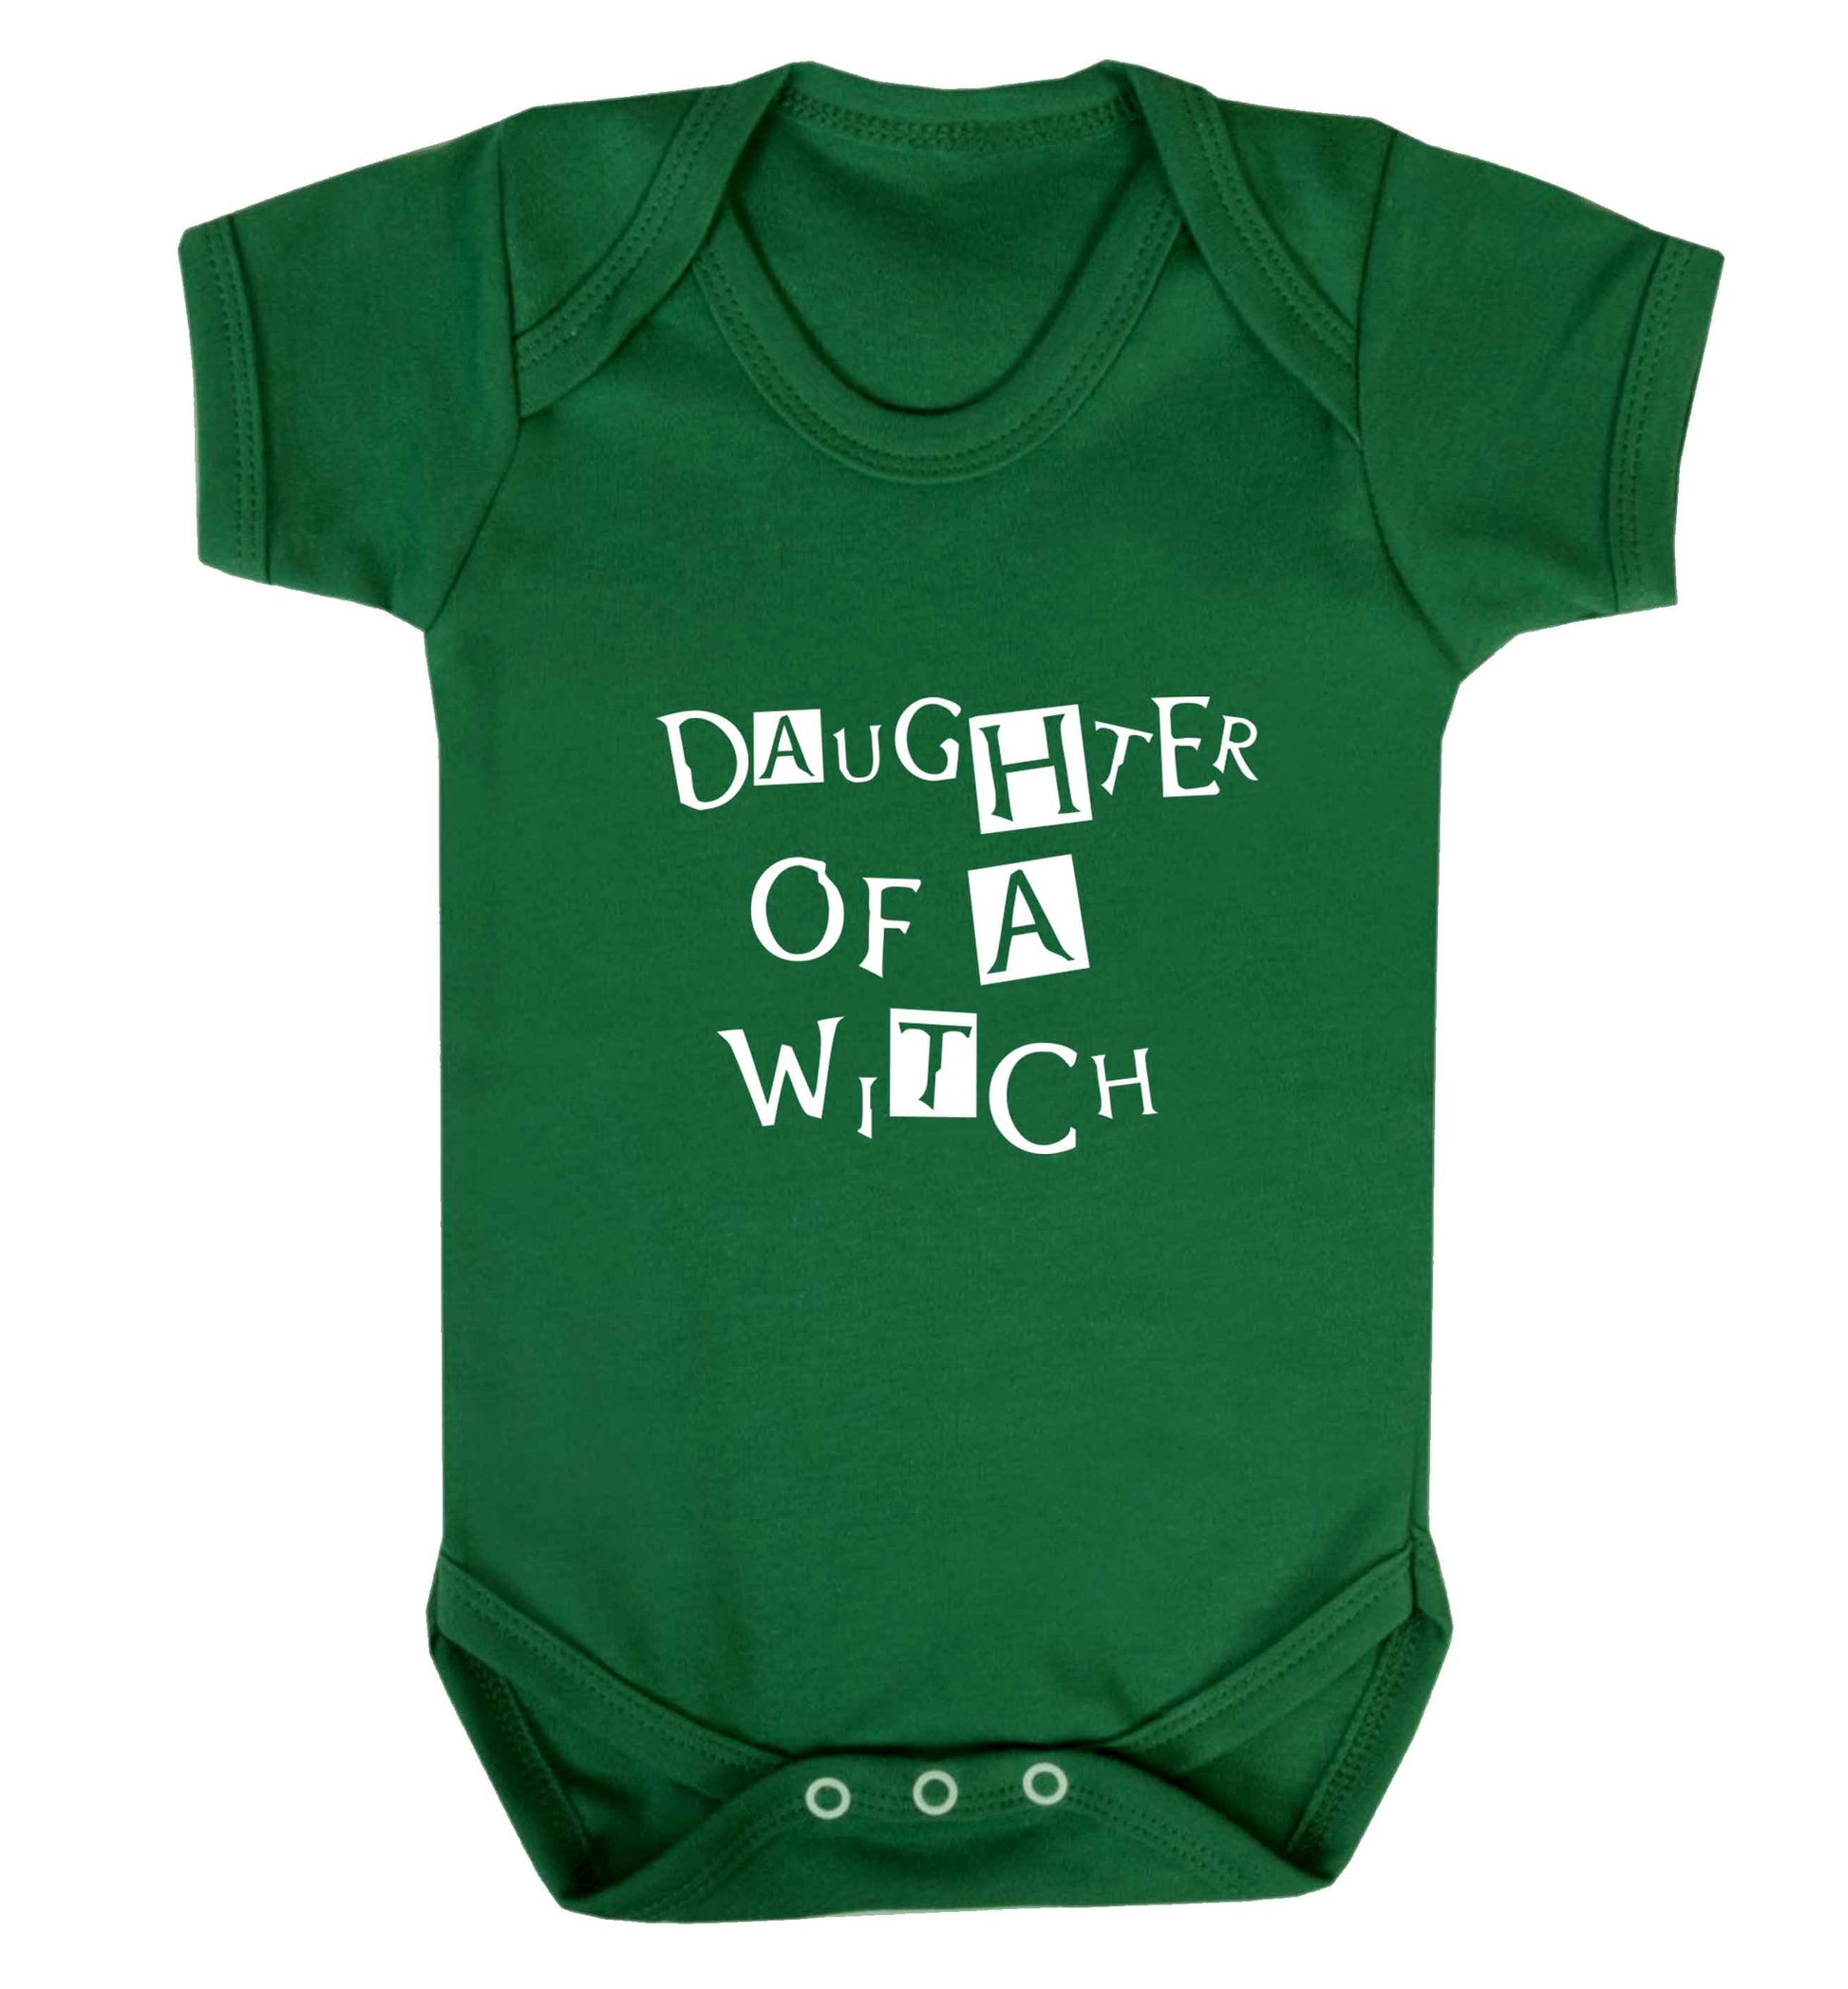 Daughter of a witch baby vest green 18-24 months